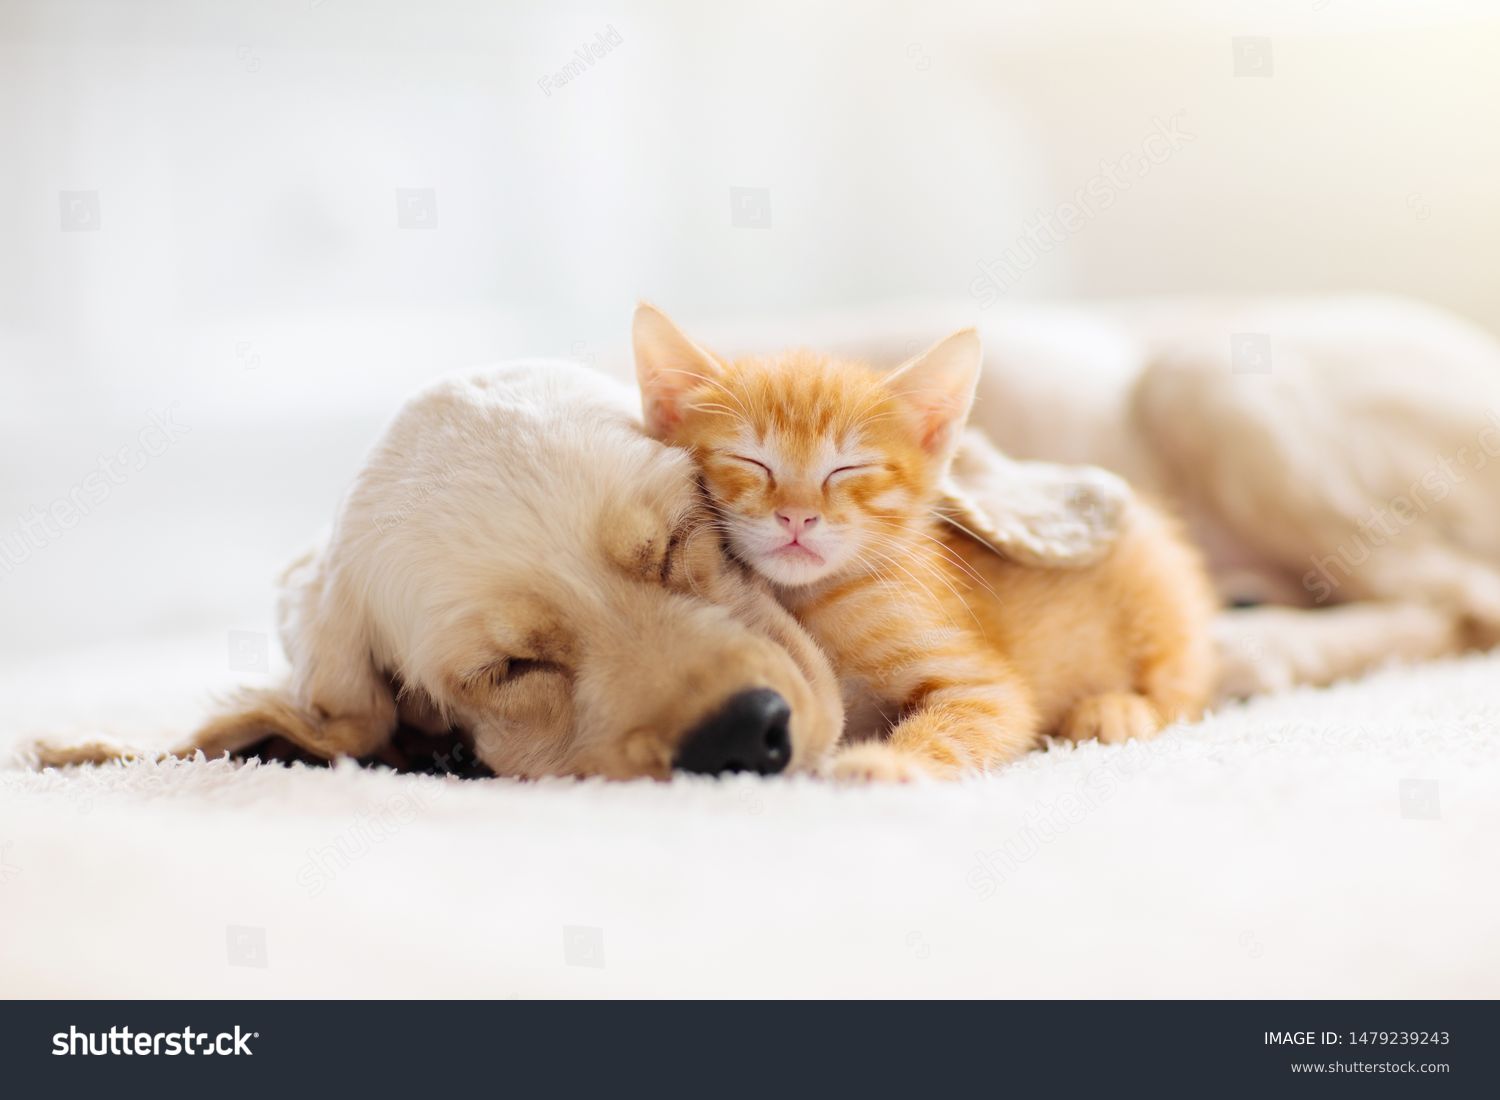 Cat and dog sleeping together. Kitten and puppy taking nap. Home pets. Animal care. Love and friendship. Domestic animals. #1479239243